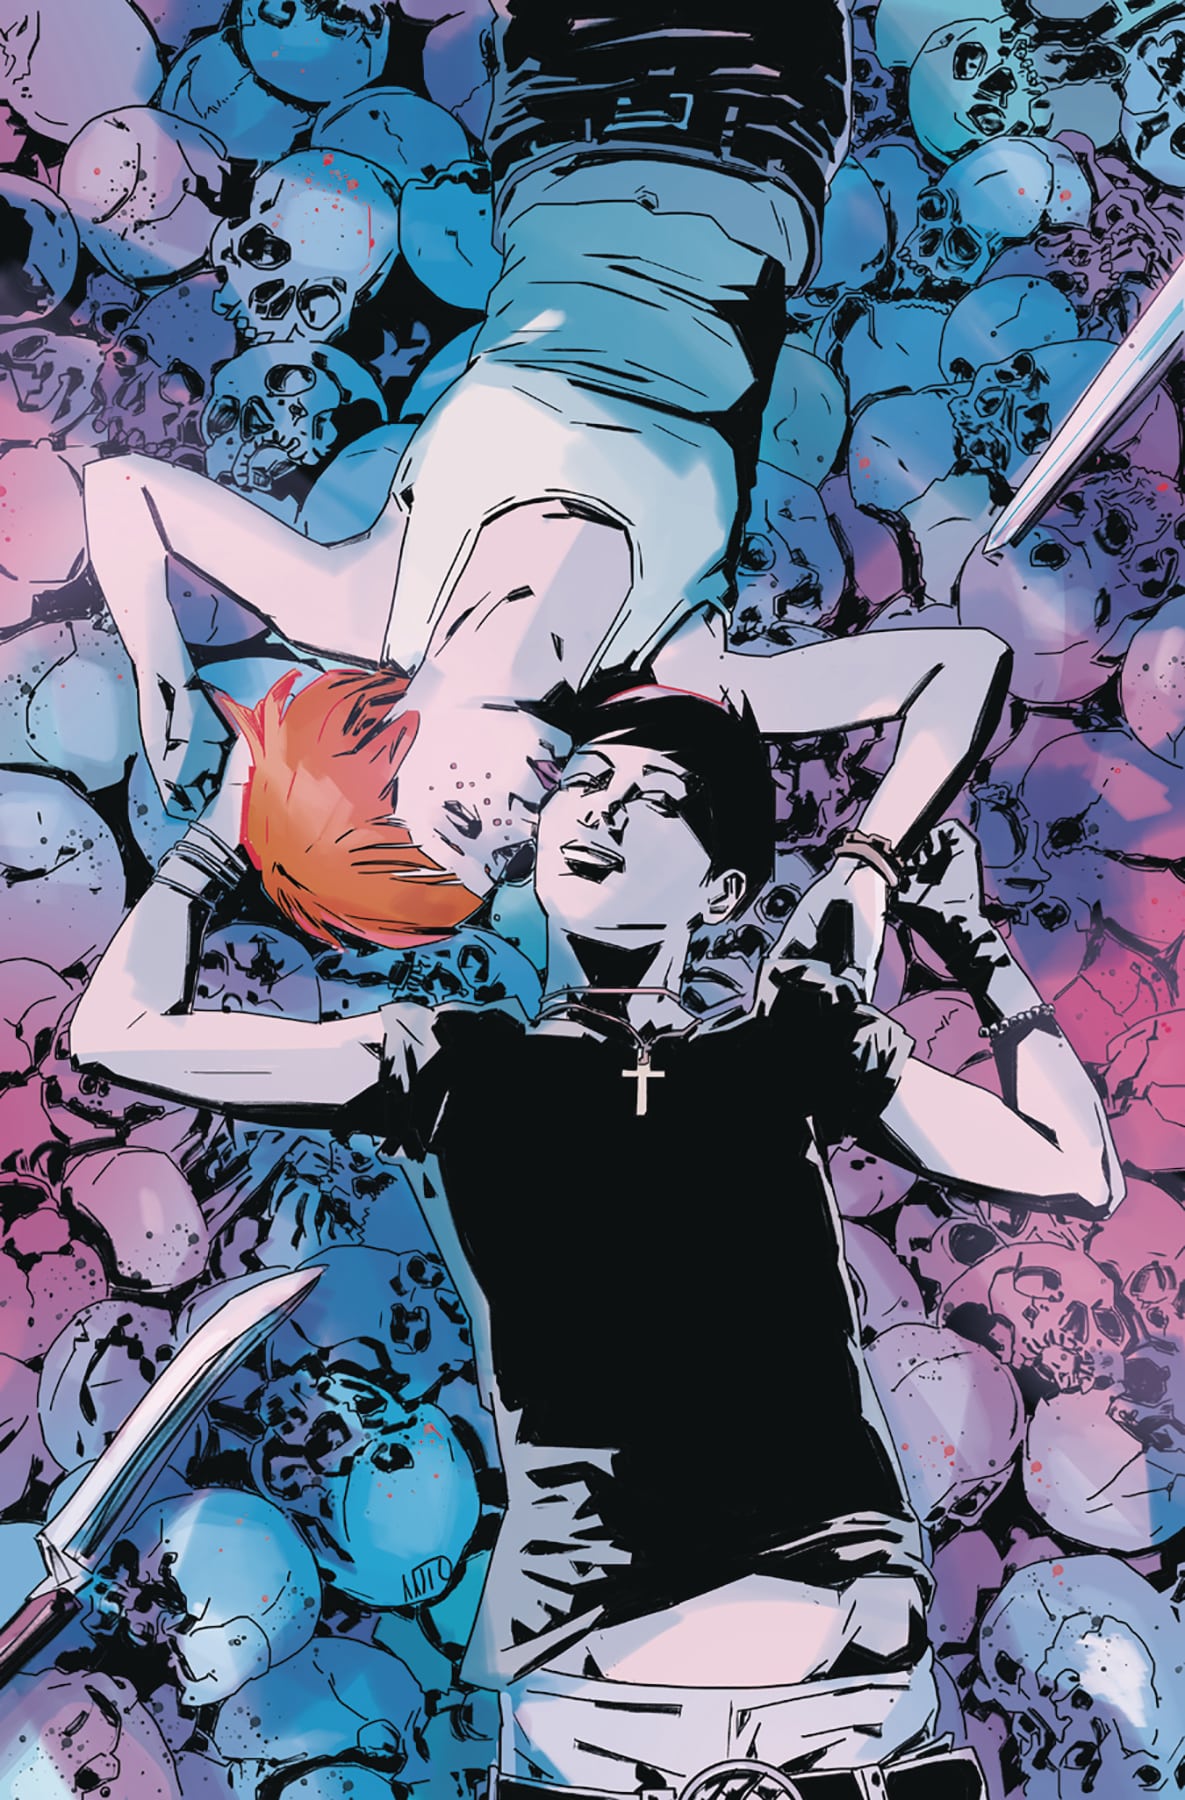 Clankillers #2 review: Headless, heartless, and a little too fast